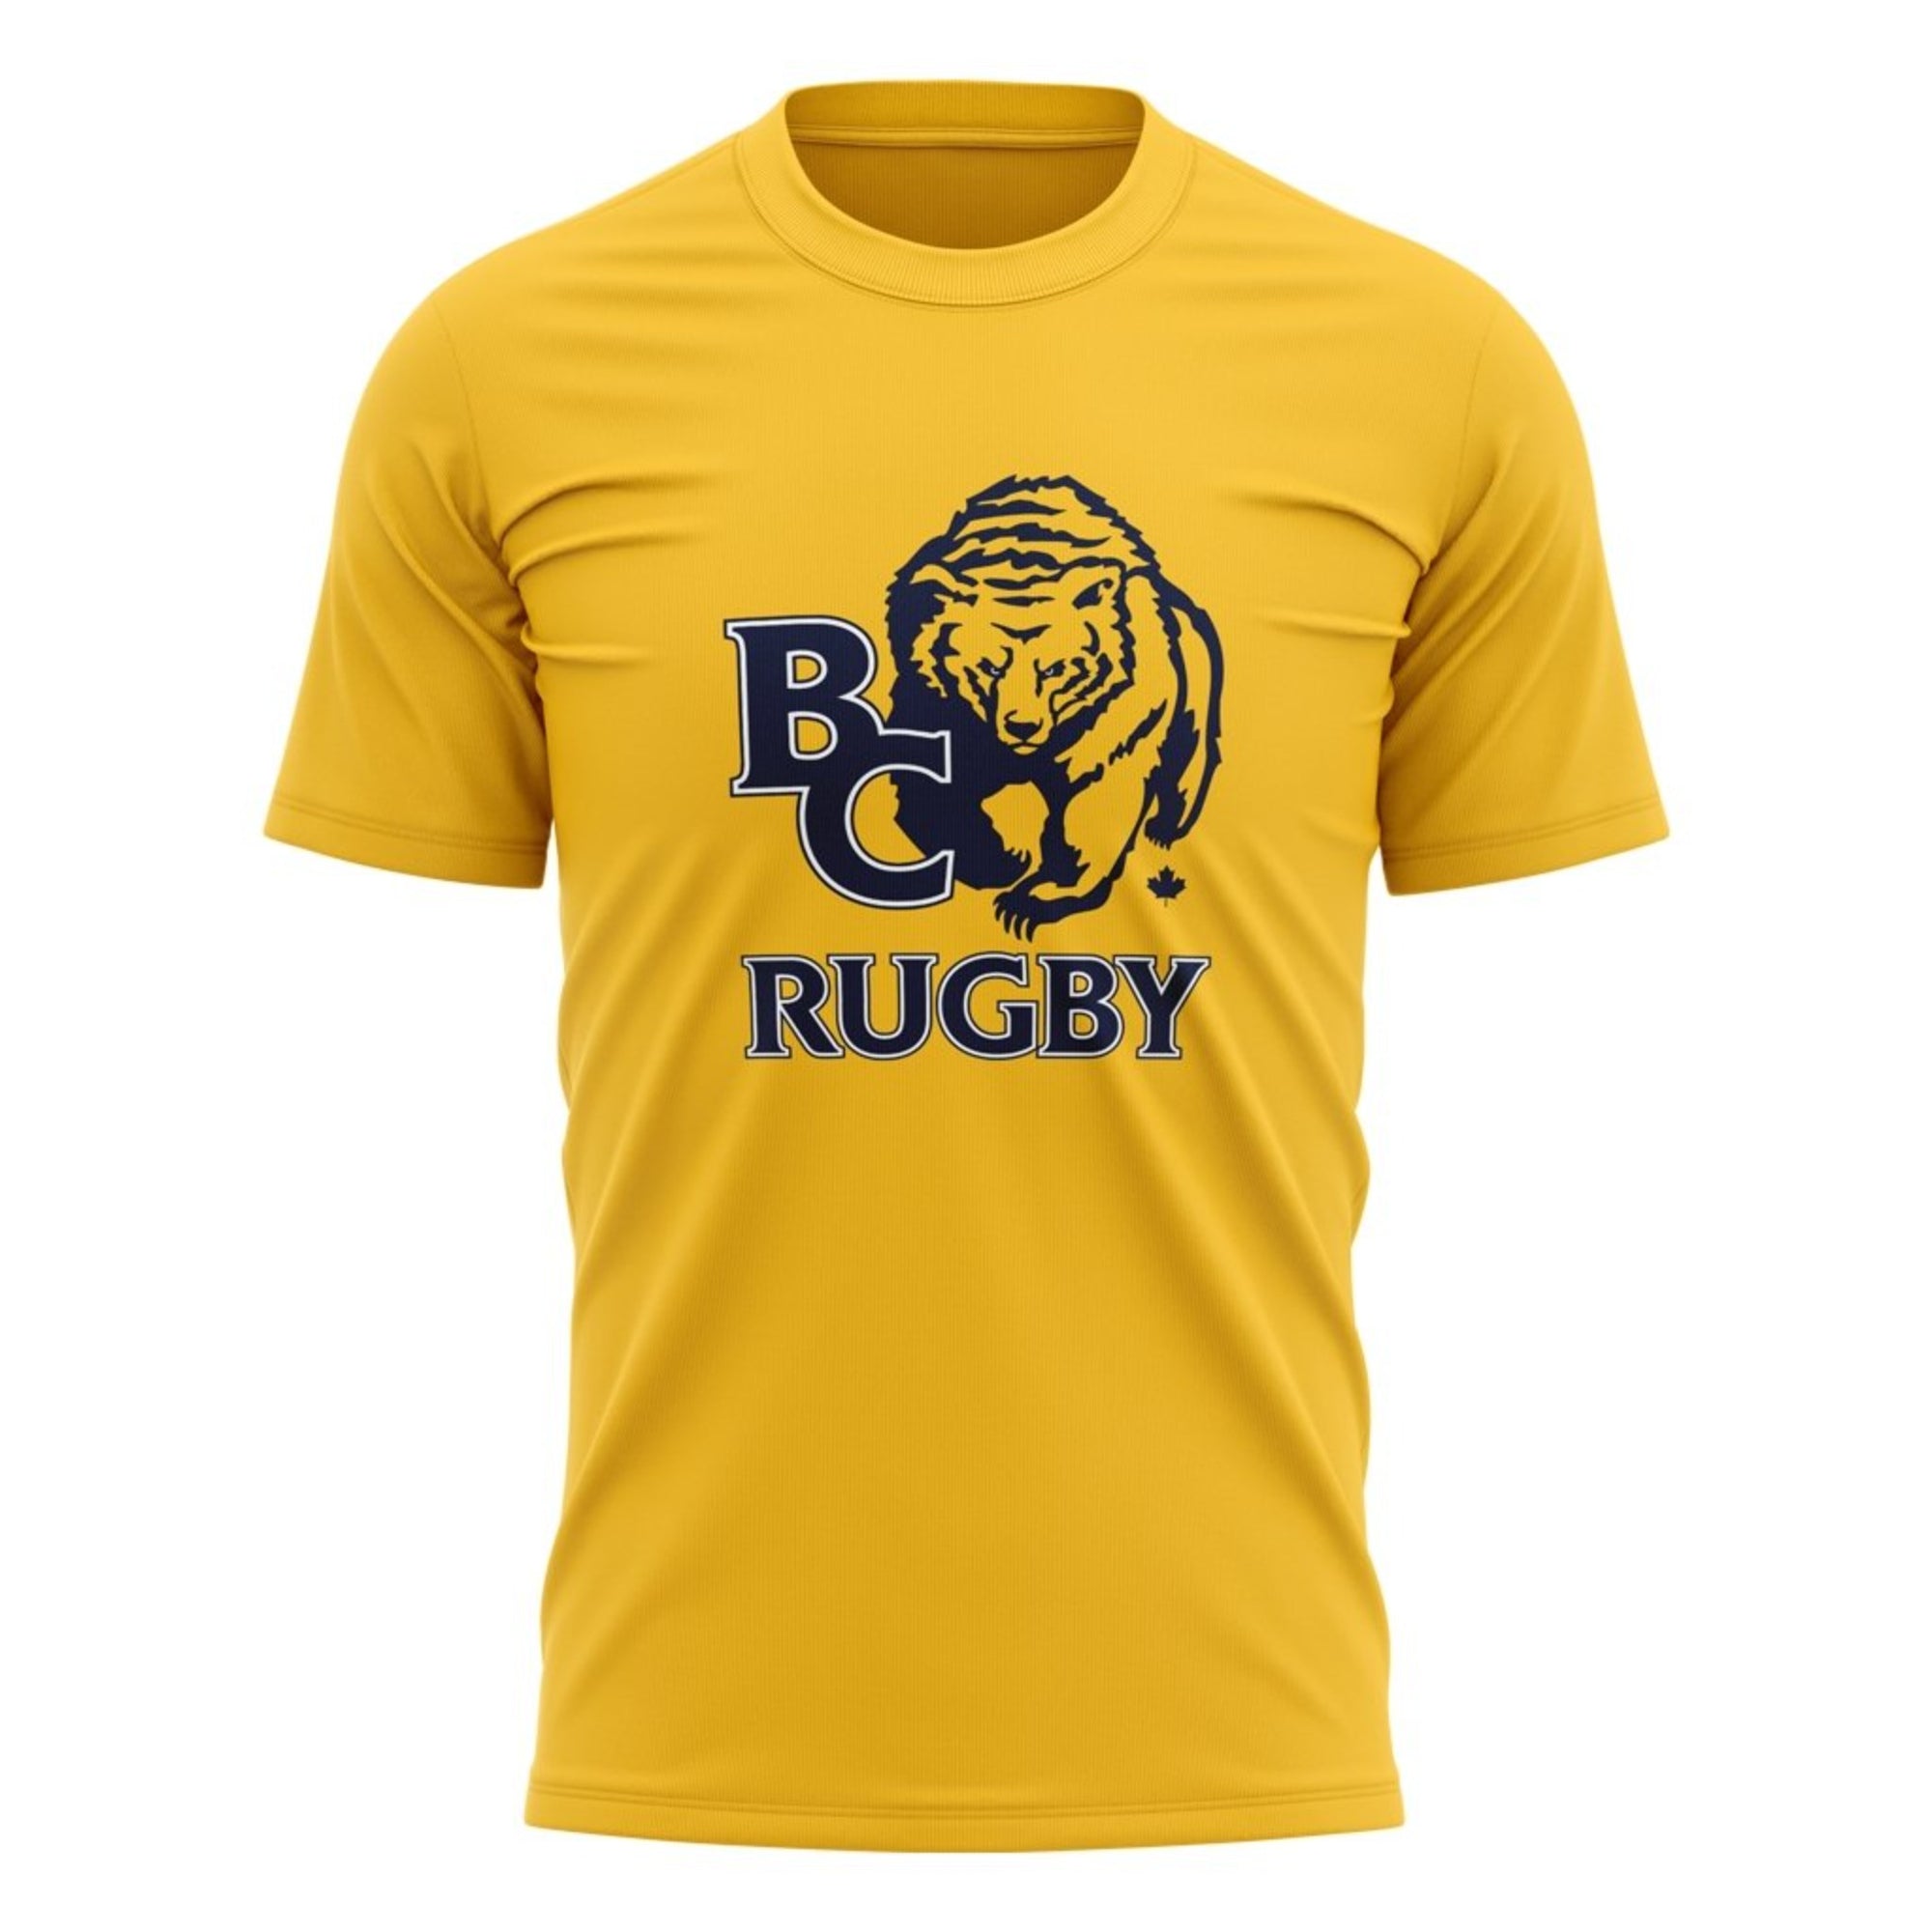 BC Rugby 2021 "Team" Tee - Youth Navy/Grey/White/Gold - www.therugbyshop.com www.therugbyshop.com YOUTH / GOLD / XS XIX Brands TEES BC Rugby 2021 "Team" Tee - Youth Navy/Grey/White/Gold